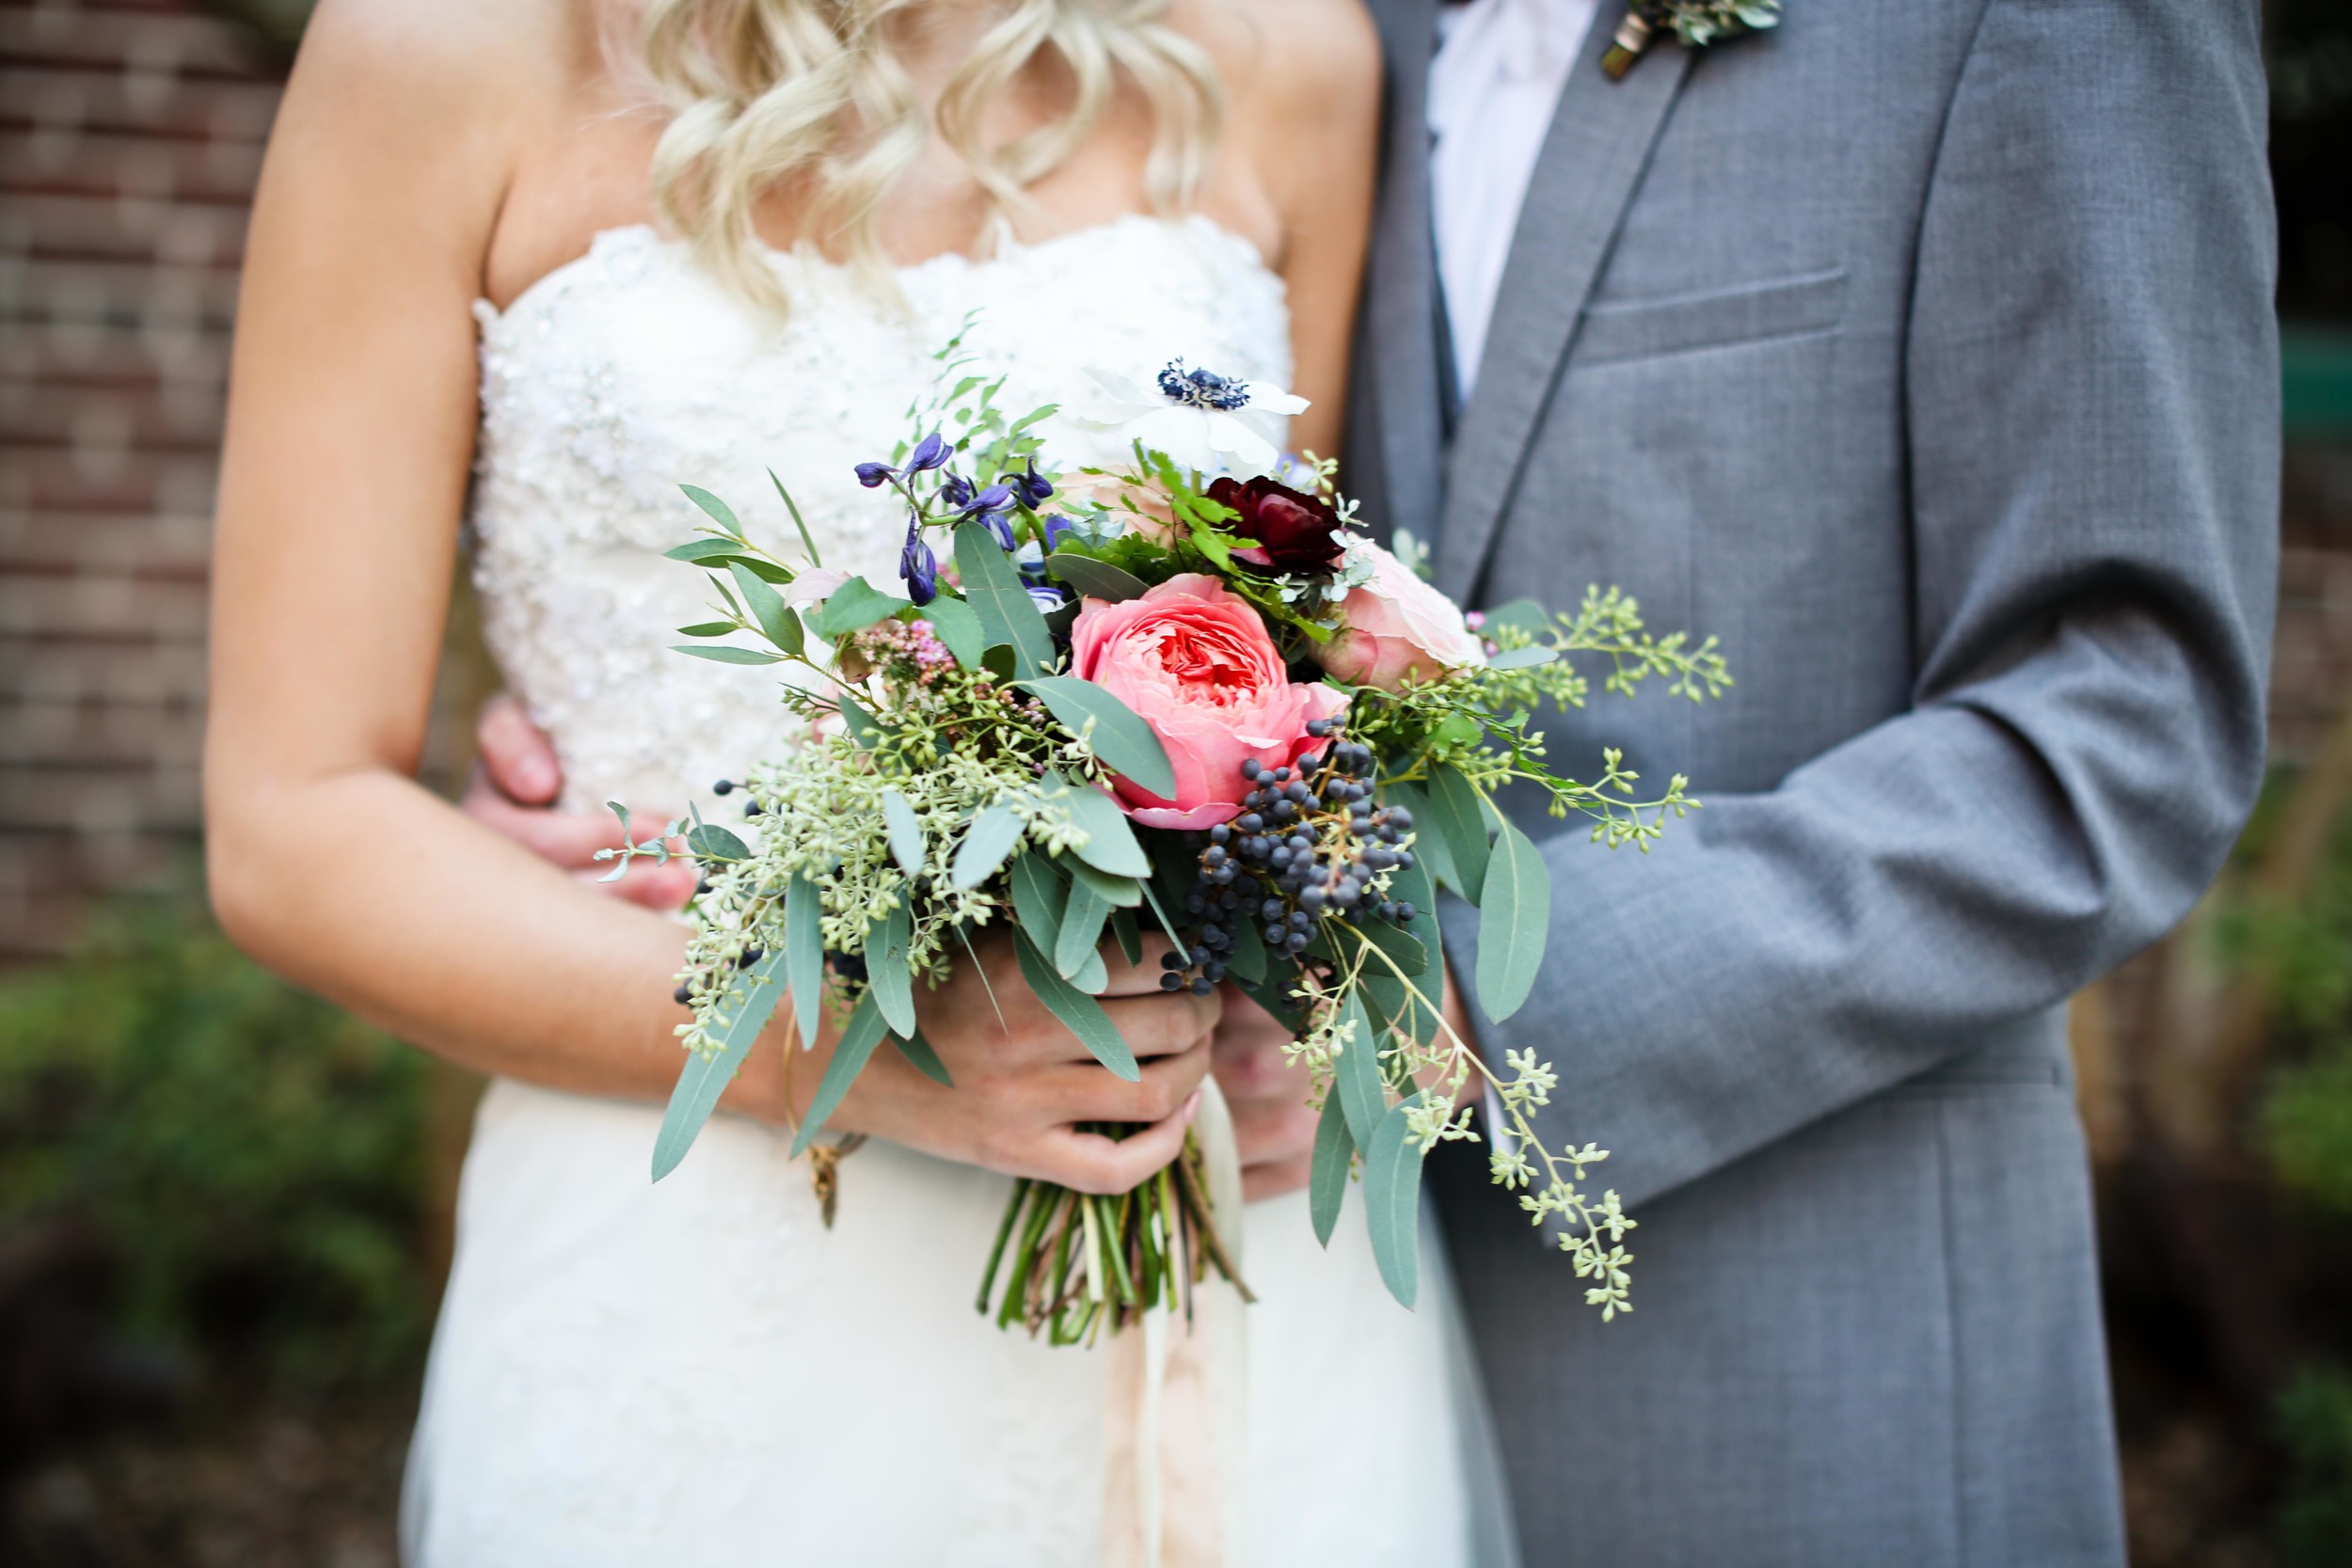 Lush bridal bouquet with rosy pink garden roses, anemones, and navy berries // Nashville and the Southeast Florist